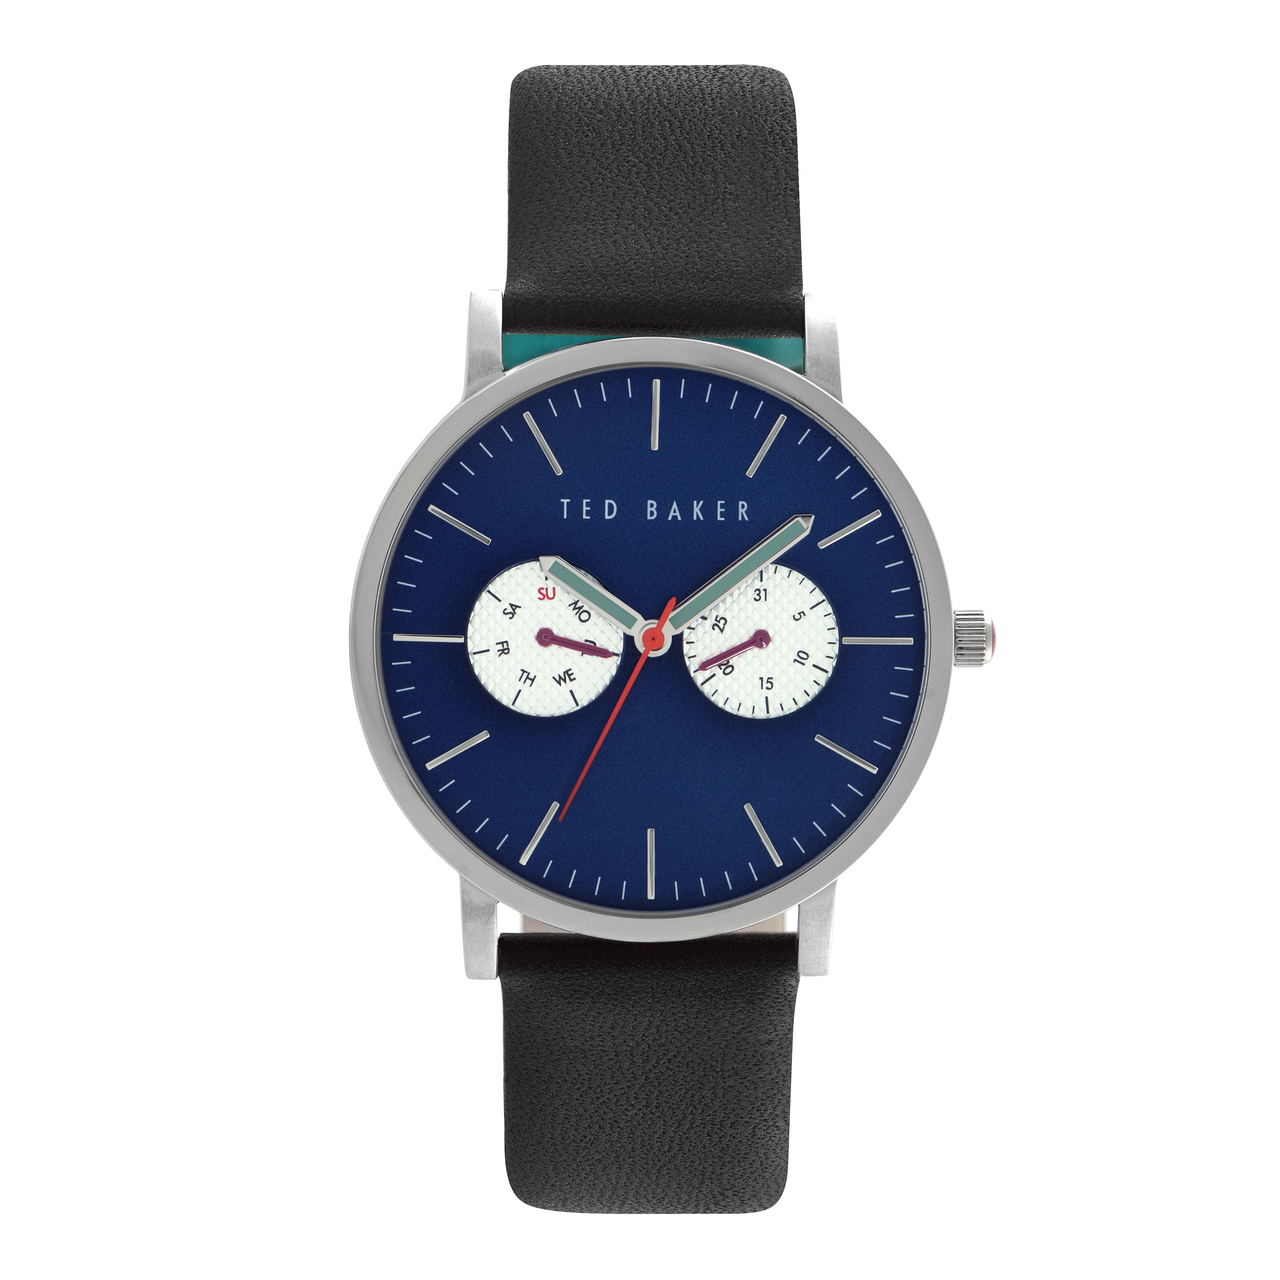 New In: Designer Ted Baker Watches - WATCHO.CO.UK